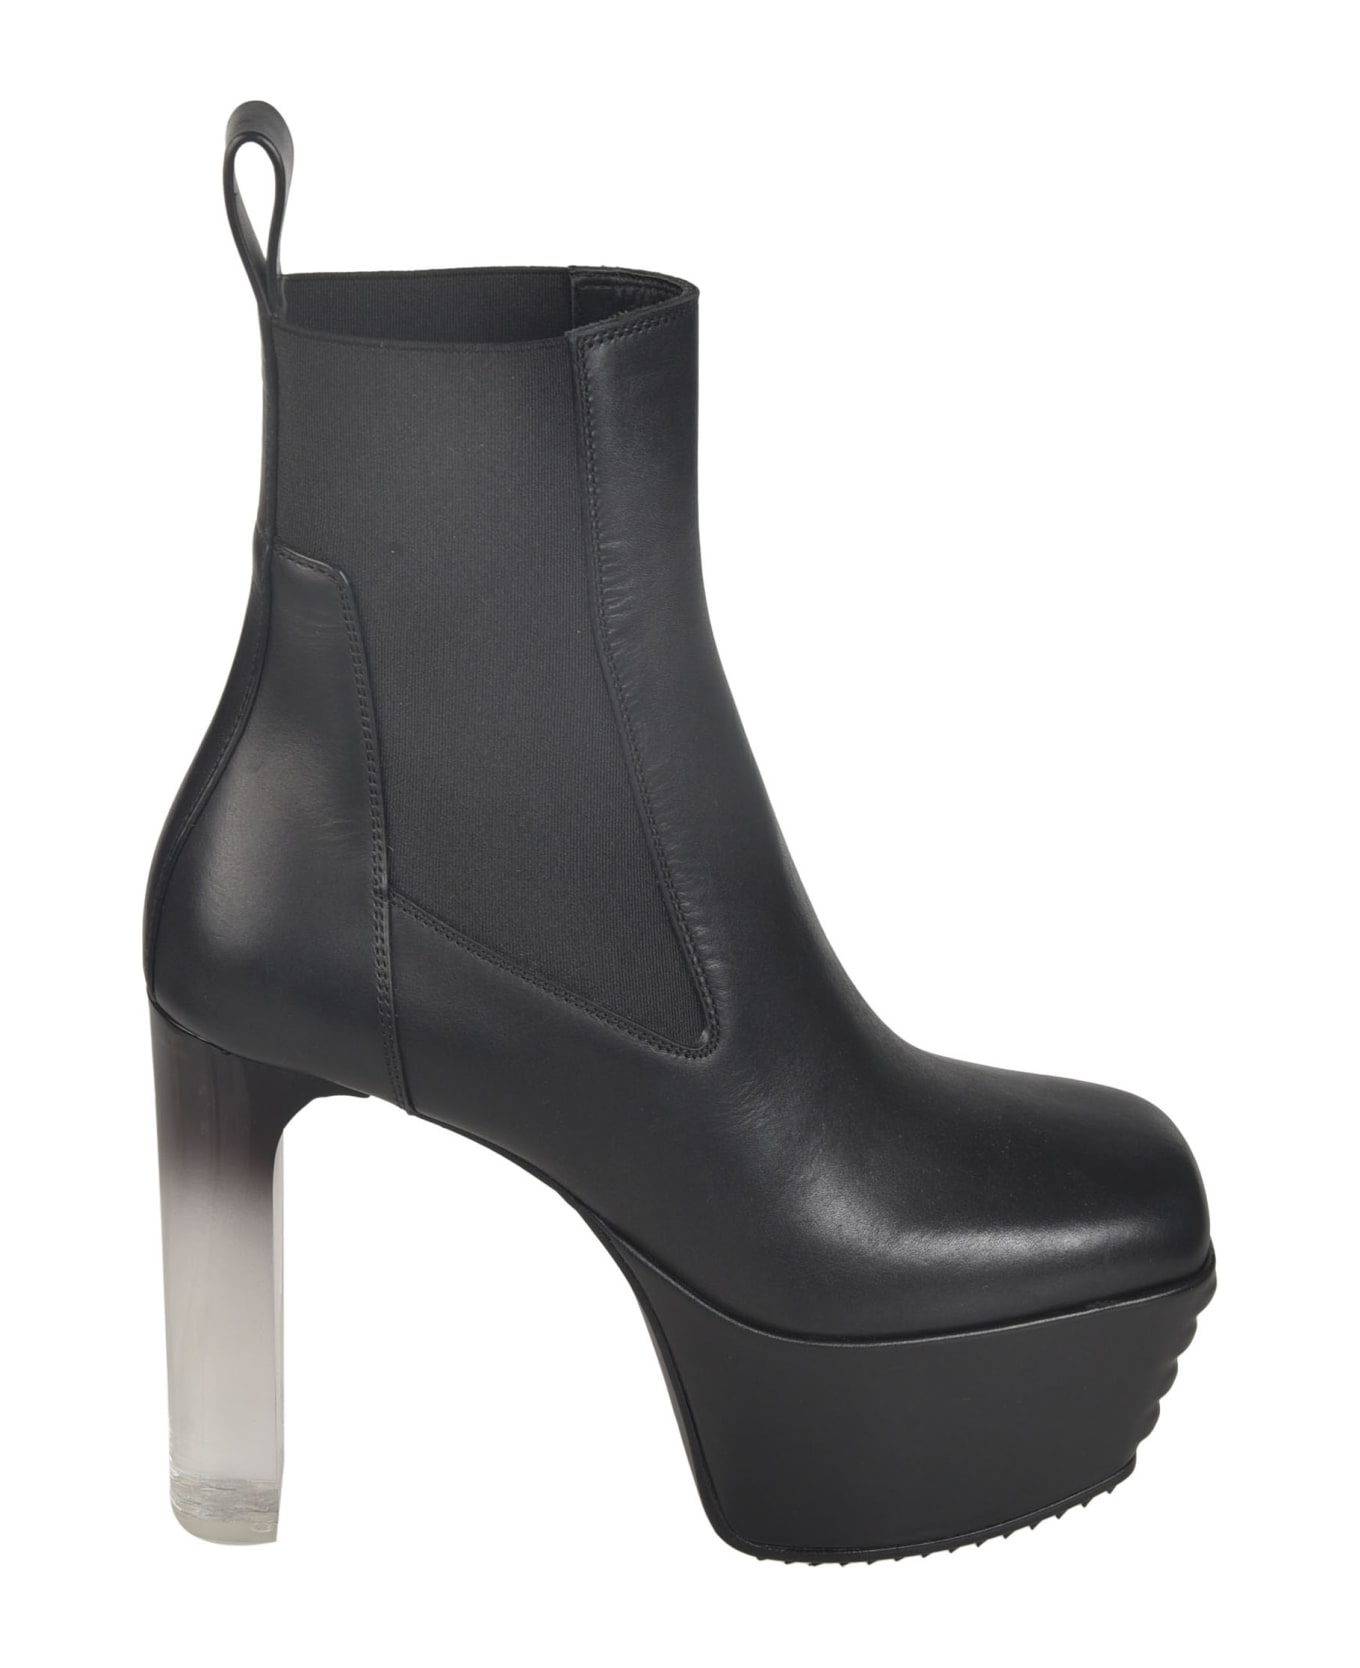 Rick Owens Open Toe Minimal Grill Beatle Boots - Black/Clear